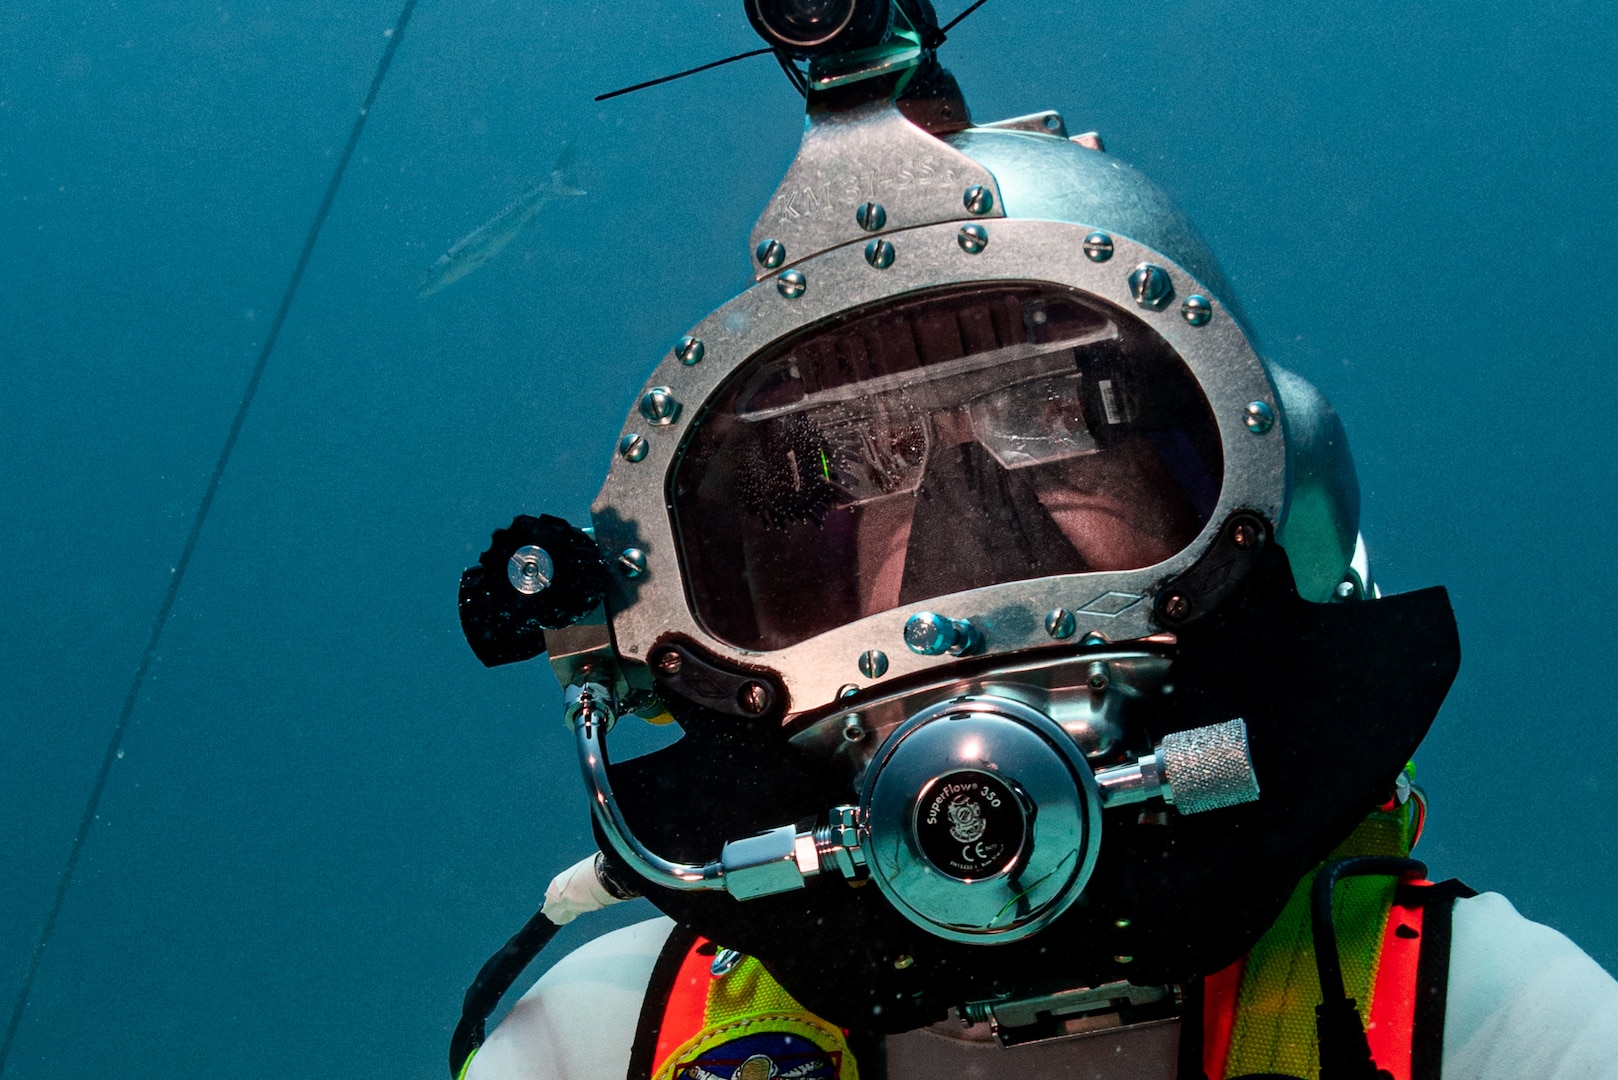 David Coan, extra vehicular activity lead for the National Aeronautics and Space Administration (NASA) Johnson Space Center dives at the Aquarius Reef Base underwater habitat.donning a Kirby Morgan-37 helmet equipped with the Divers Augmented Vision Device Generation 1.0 heads-up display during the 23rd NASA Extreme Environment Mission Operations in June 2019.